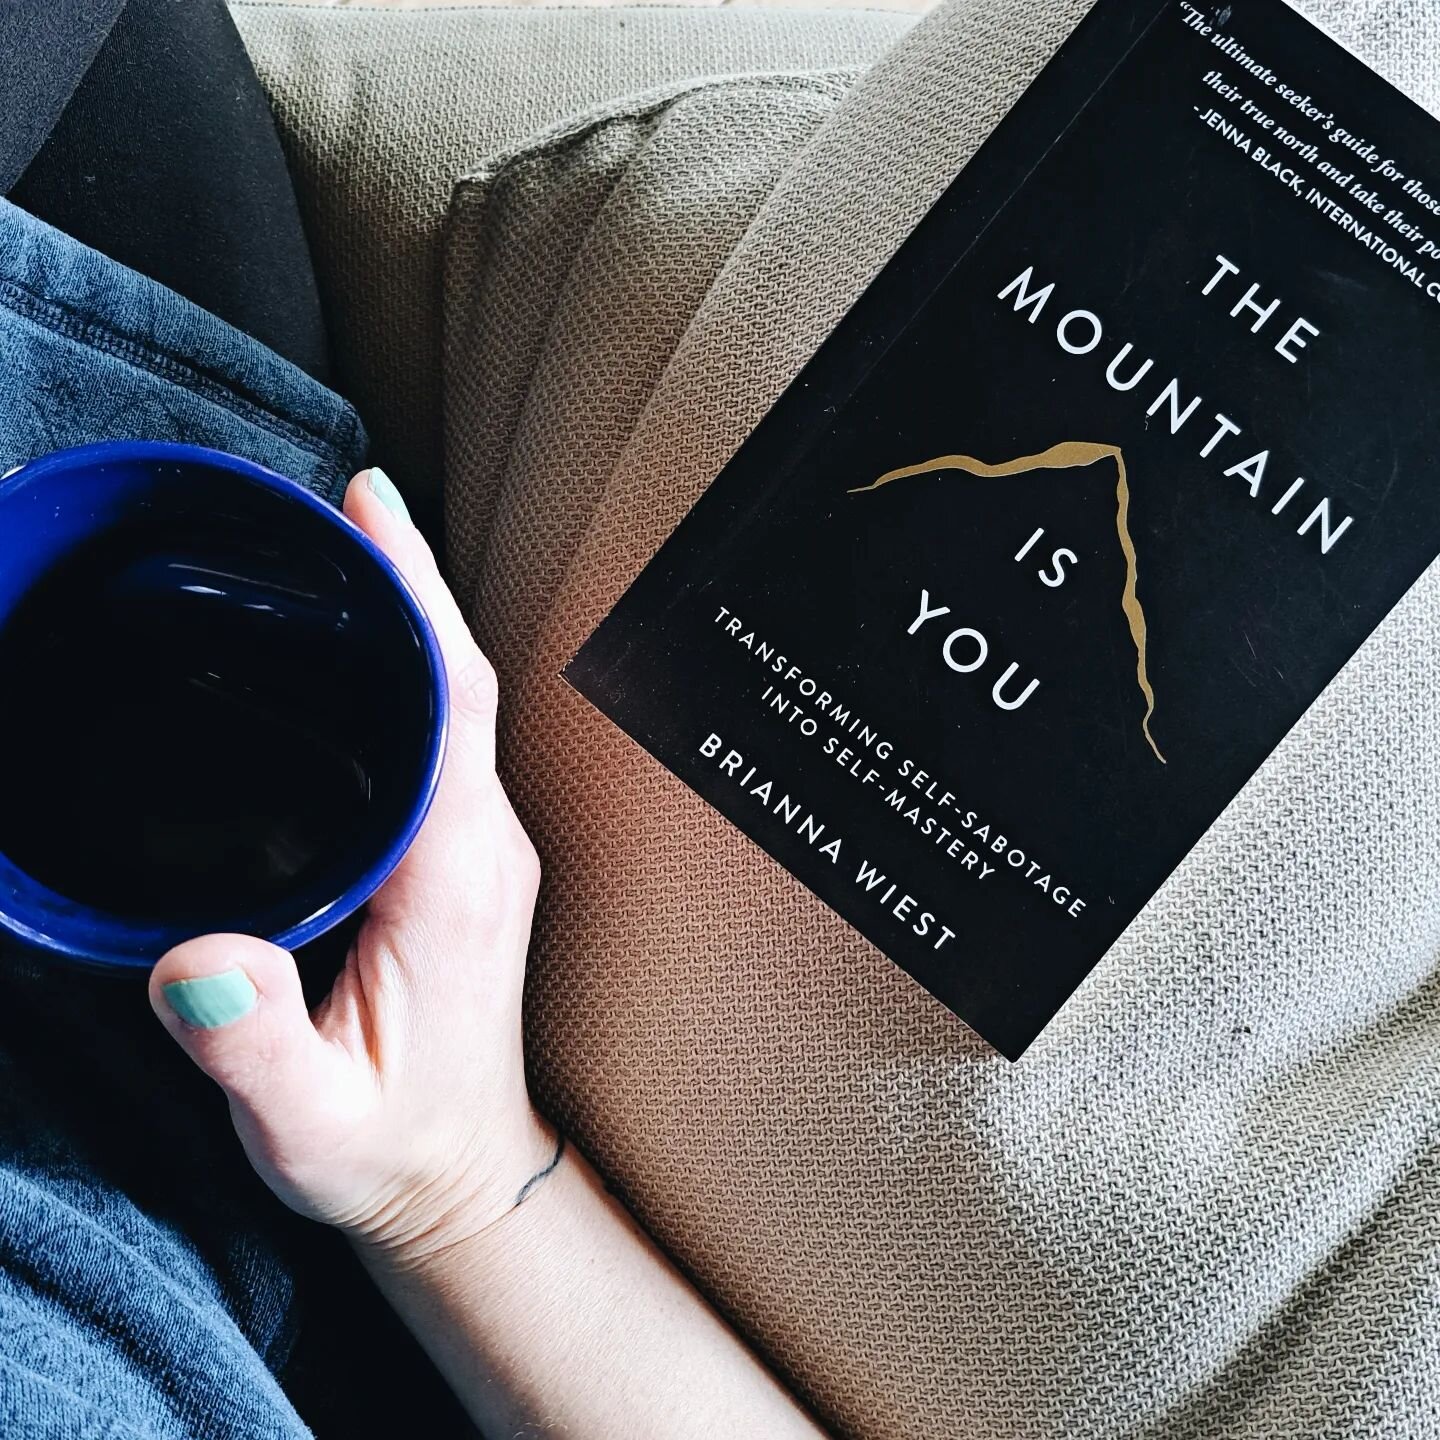 It's totally on brand for me to post every day for a week and then not for days 😆 Let me tell you, the algorithm loves me... ha!

What are you all reading and sipping on these days? I'm currently tucked into this treasure,  The Mountain Is You by @b